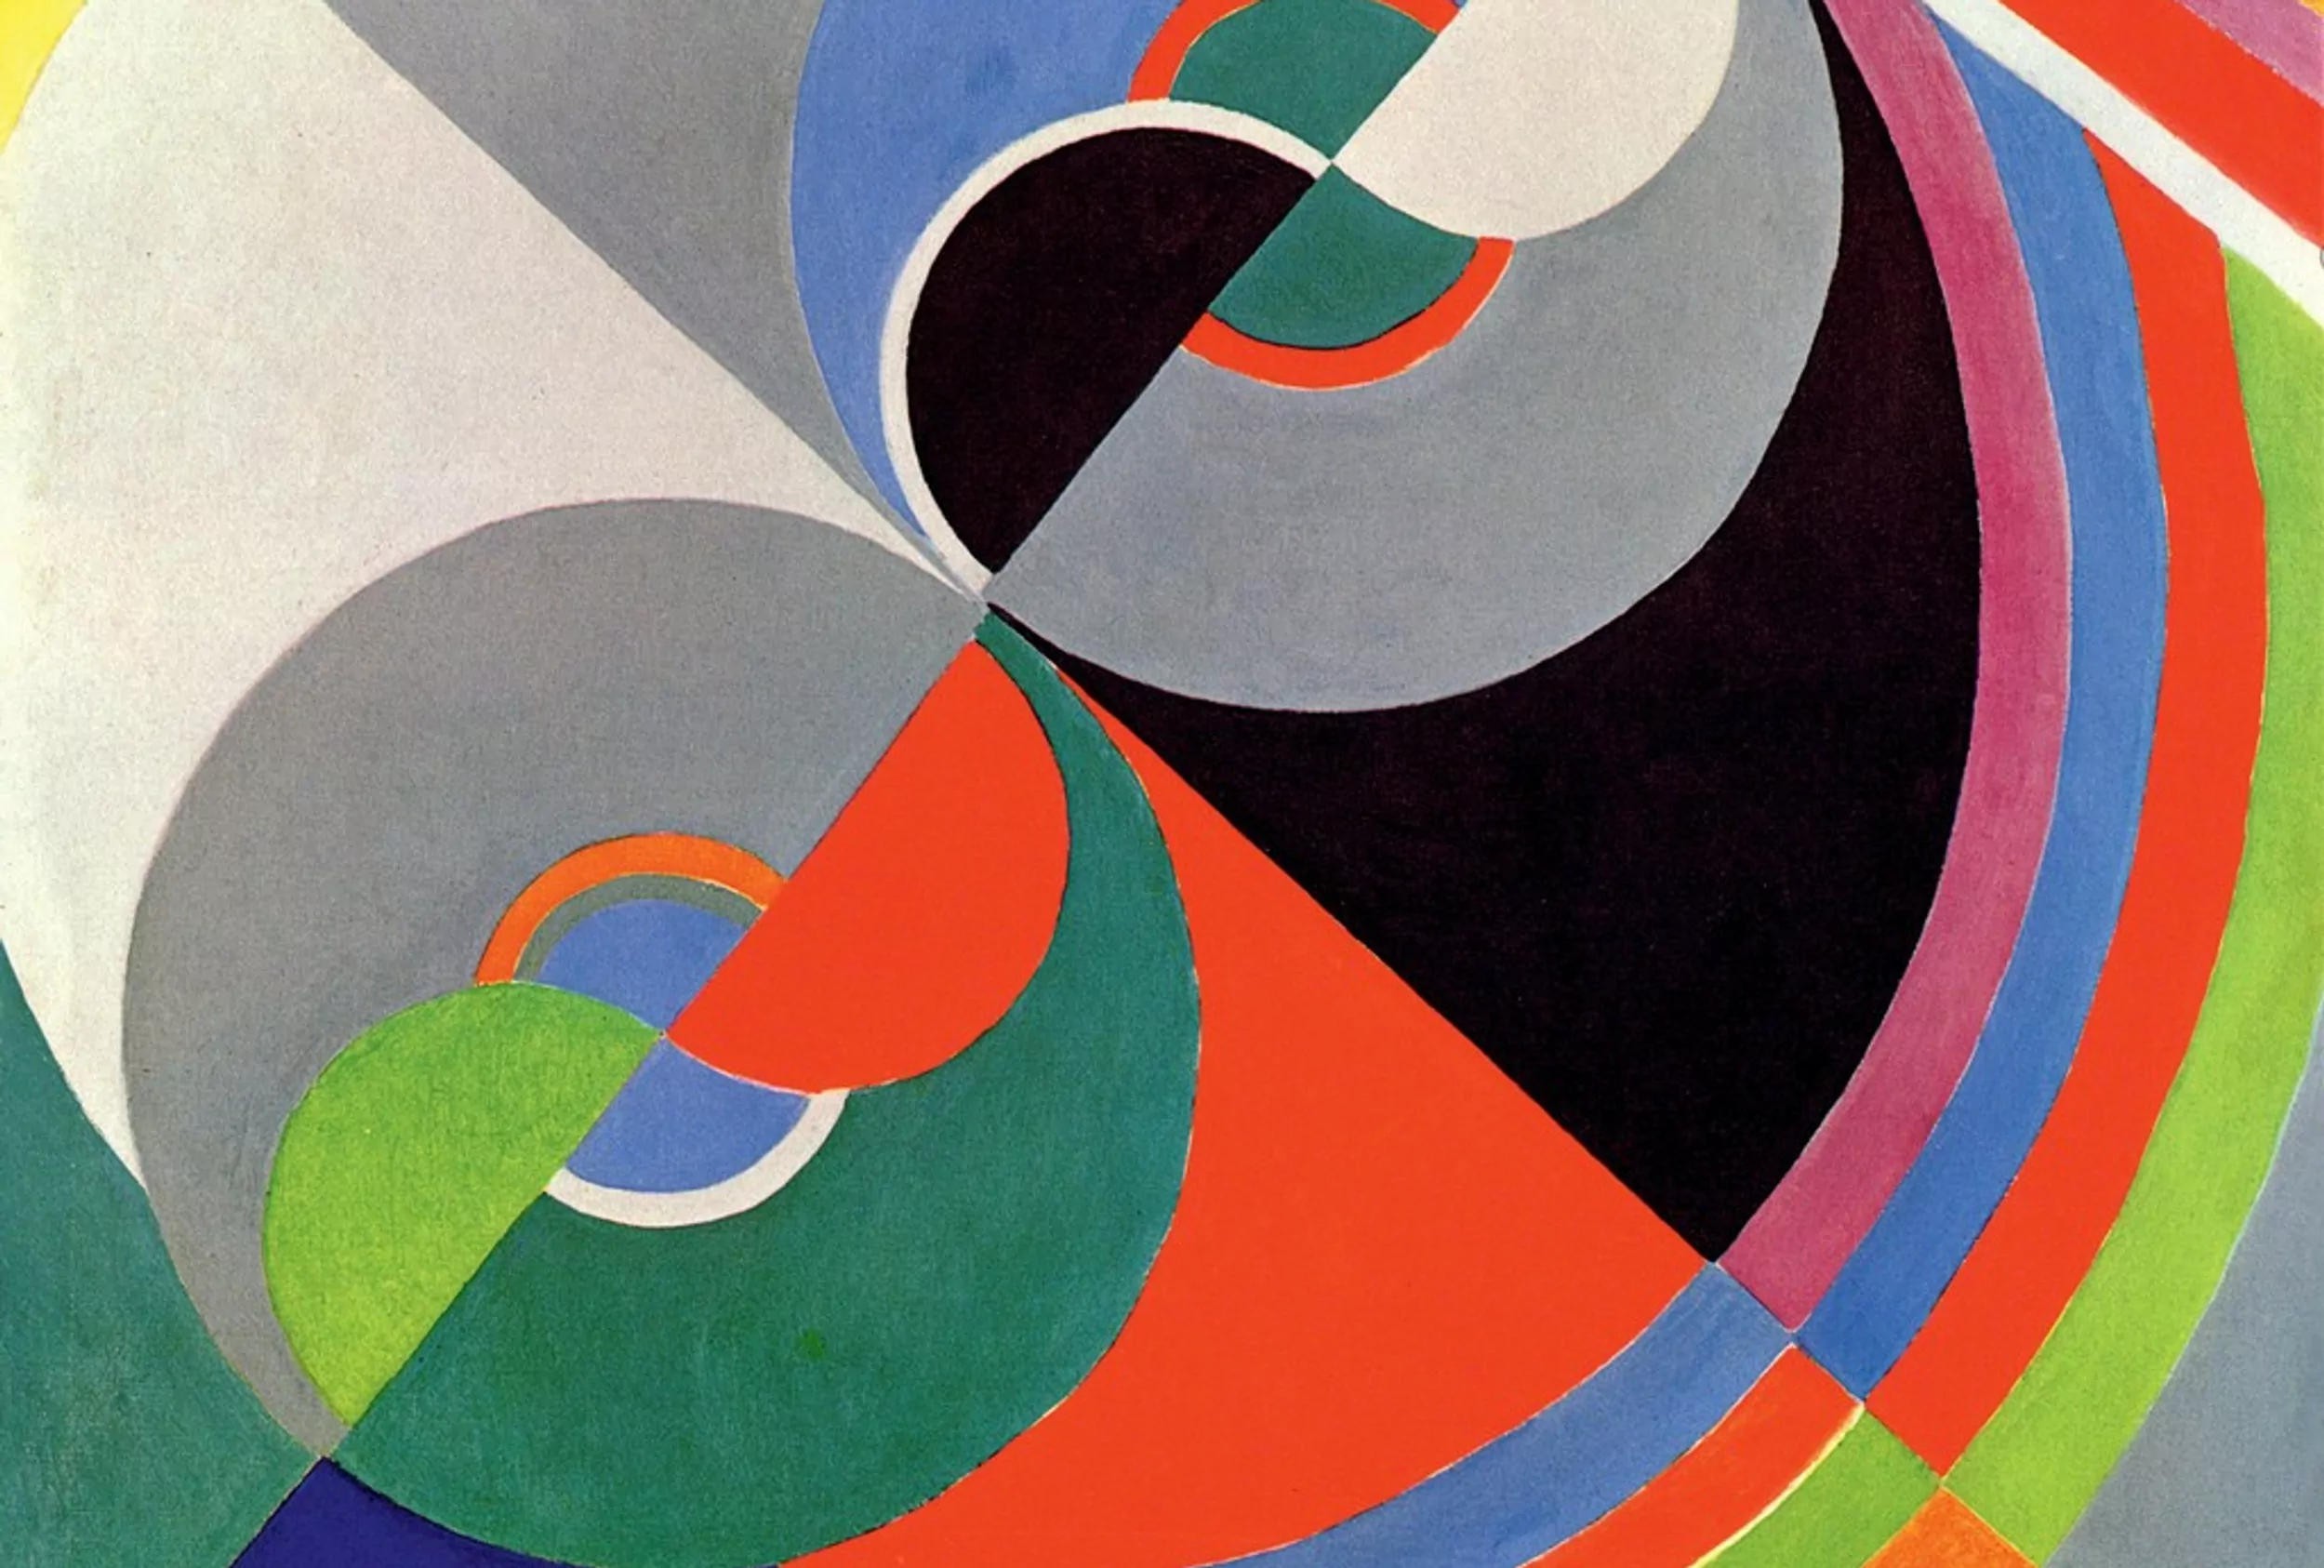 Sonia Delaunay, The Artists